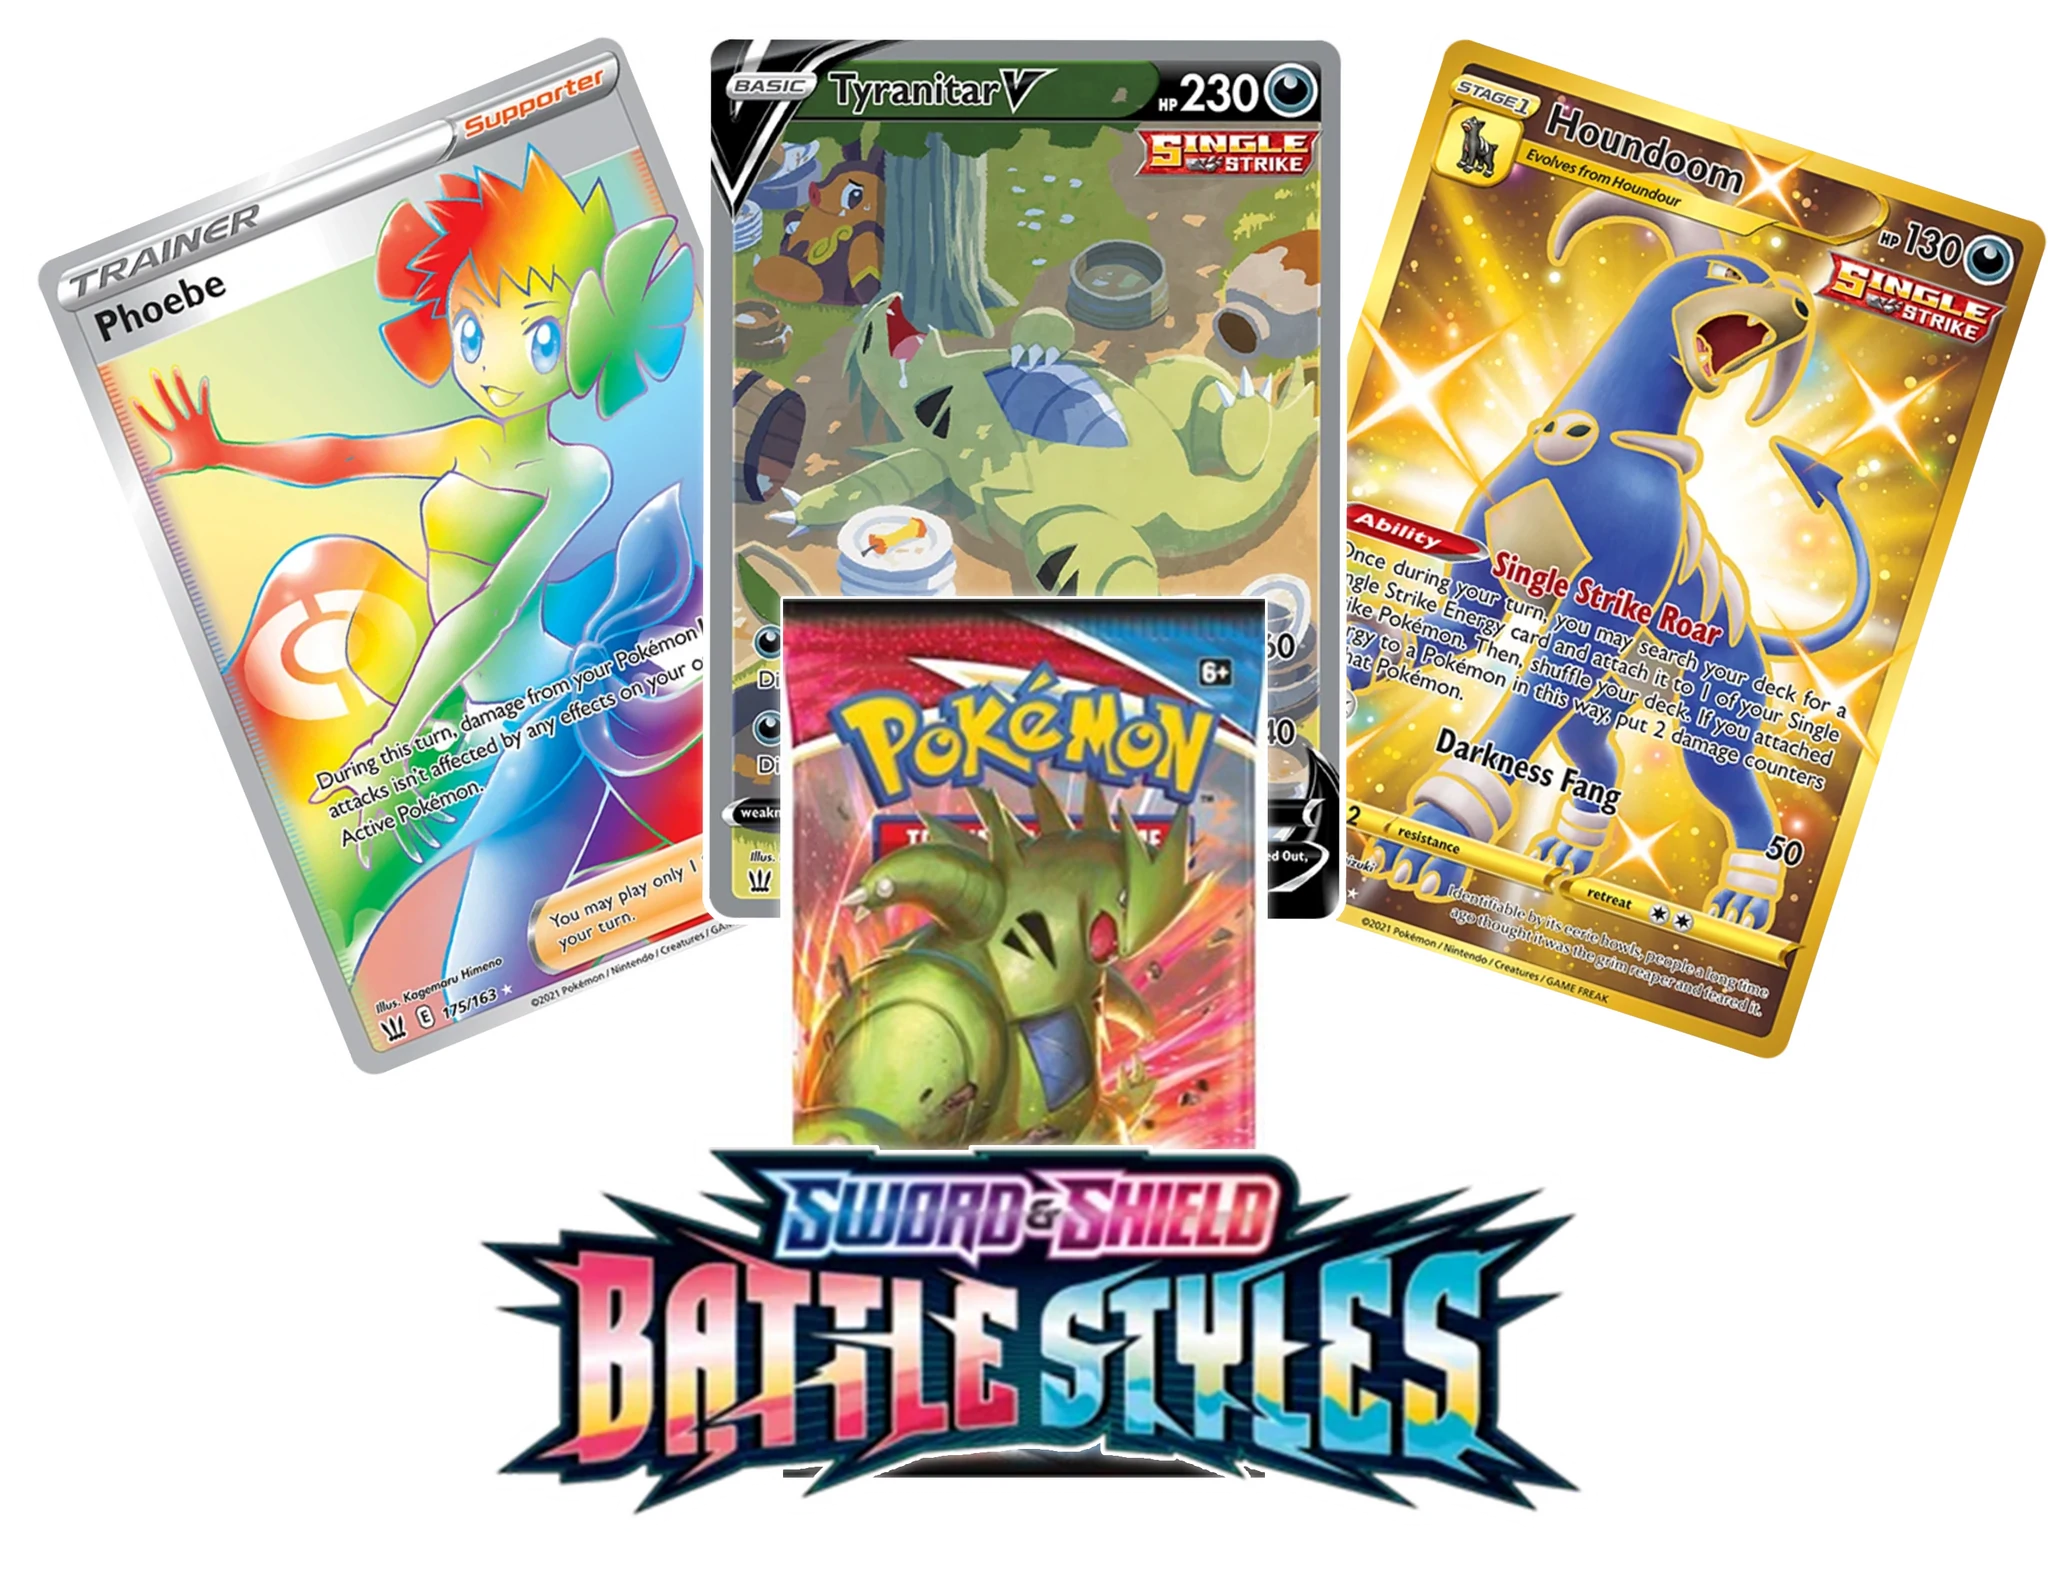 Battle Styles Booster pack